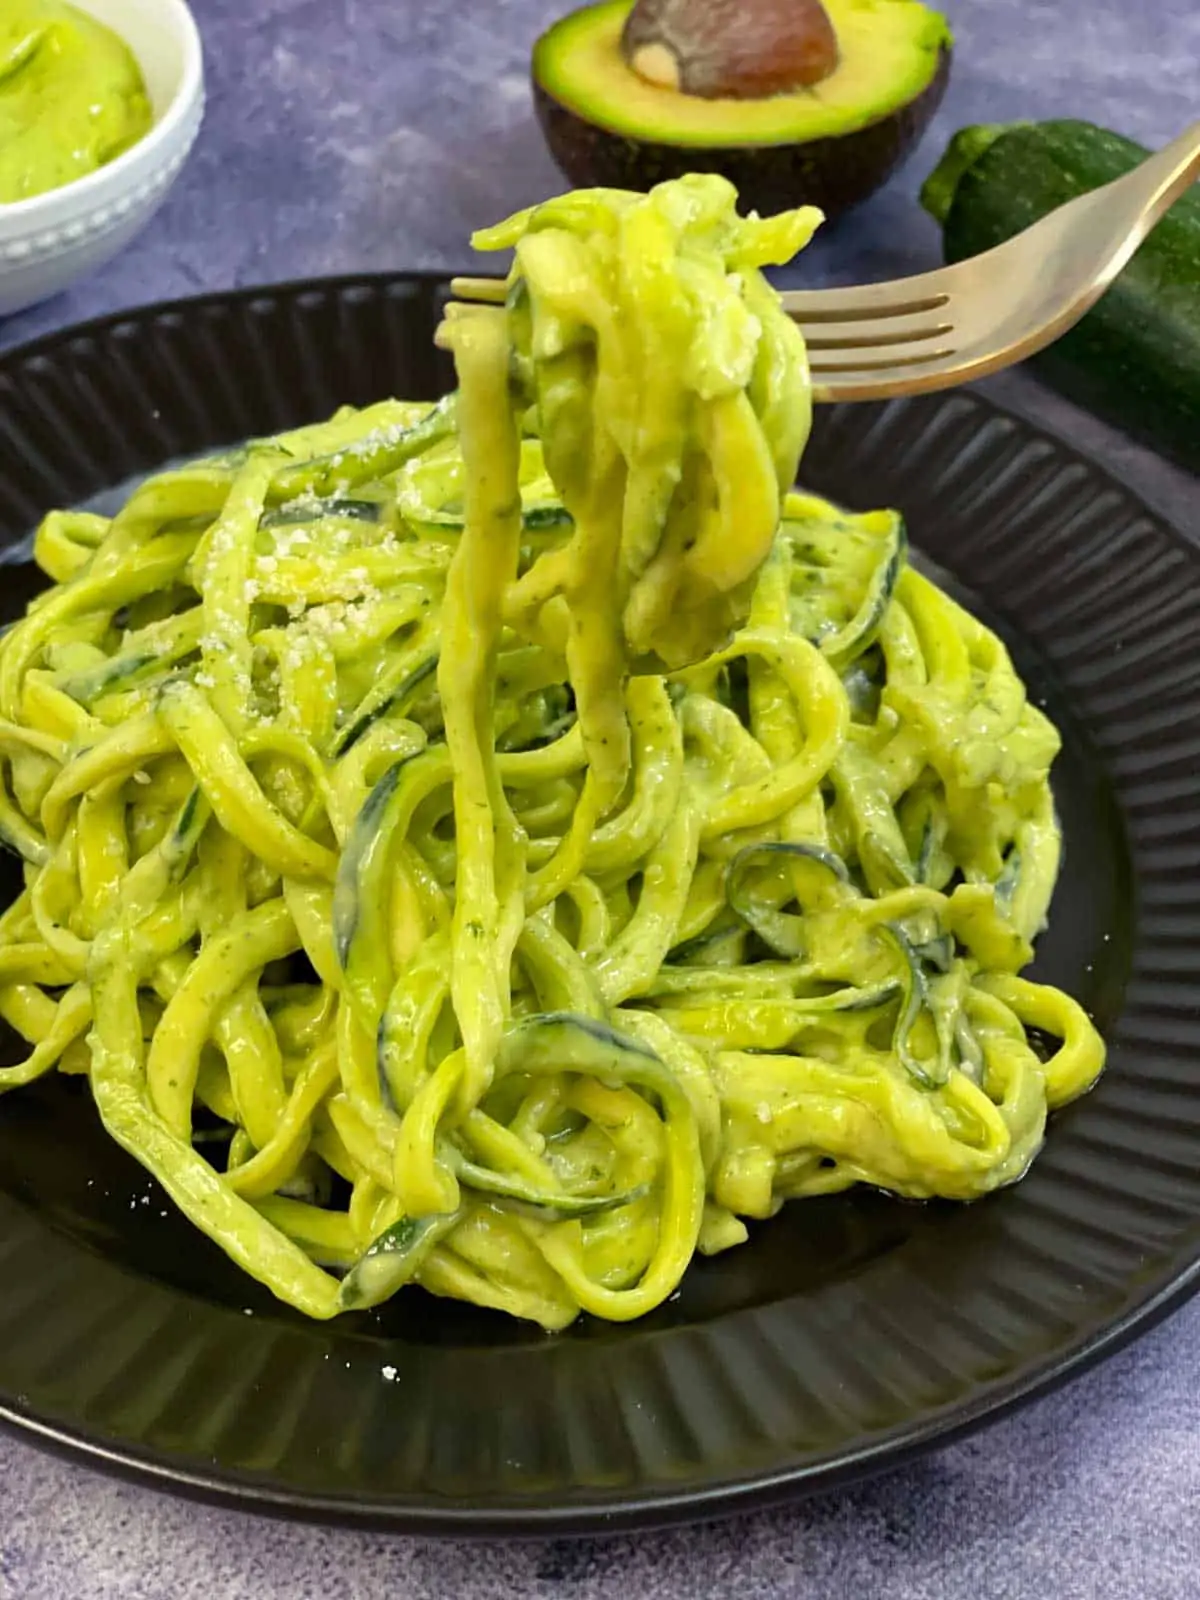 zucchini pasta in a fork served on a plate